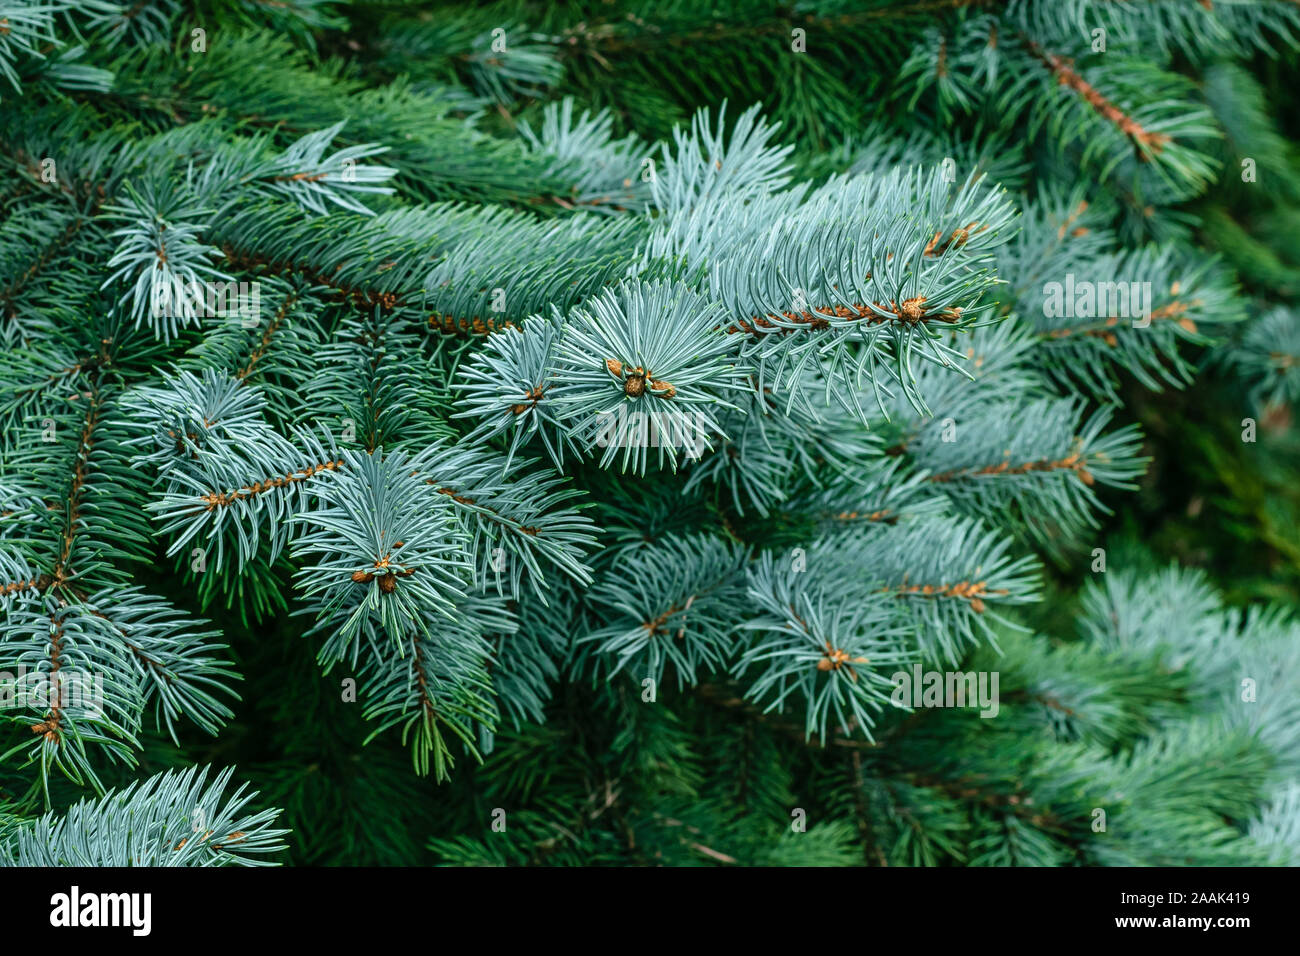 Fir tree branches of a fur tree. Spruce branch. Frame of pine needles. Pine-tree. Christmas or New Year mockup. Fir coniferous backgrounds. Stock Photo